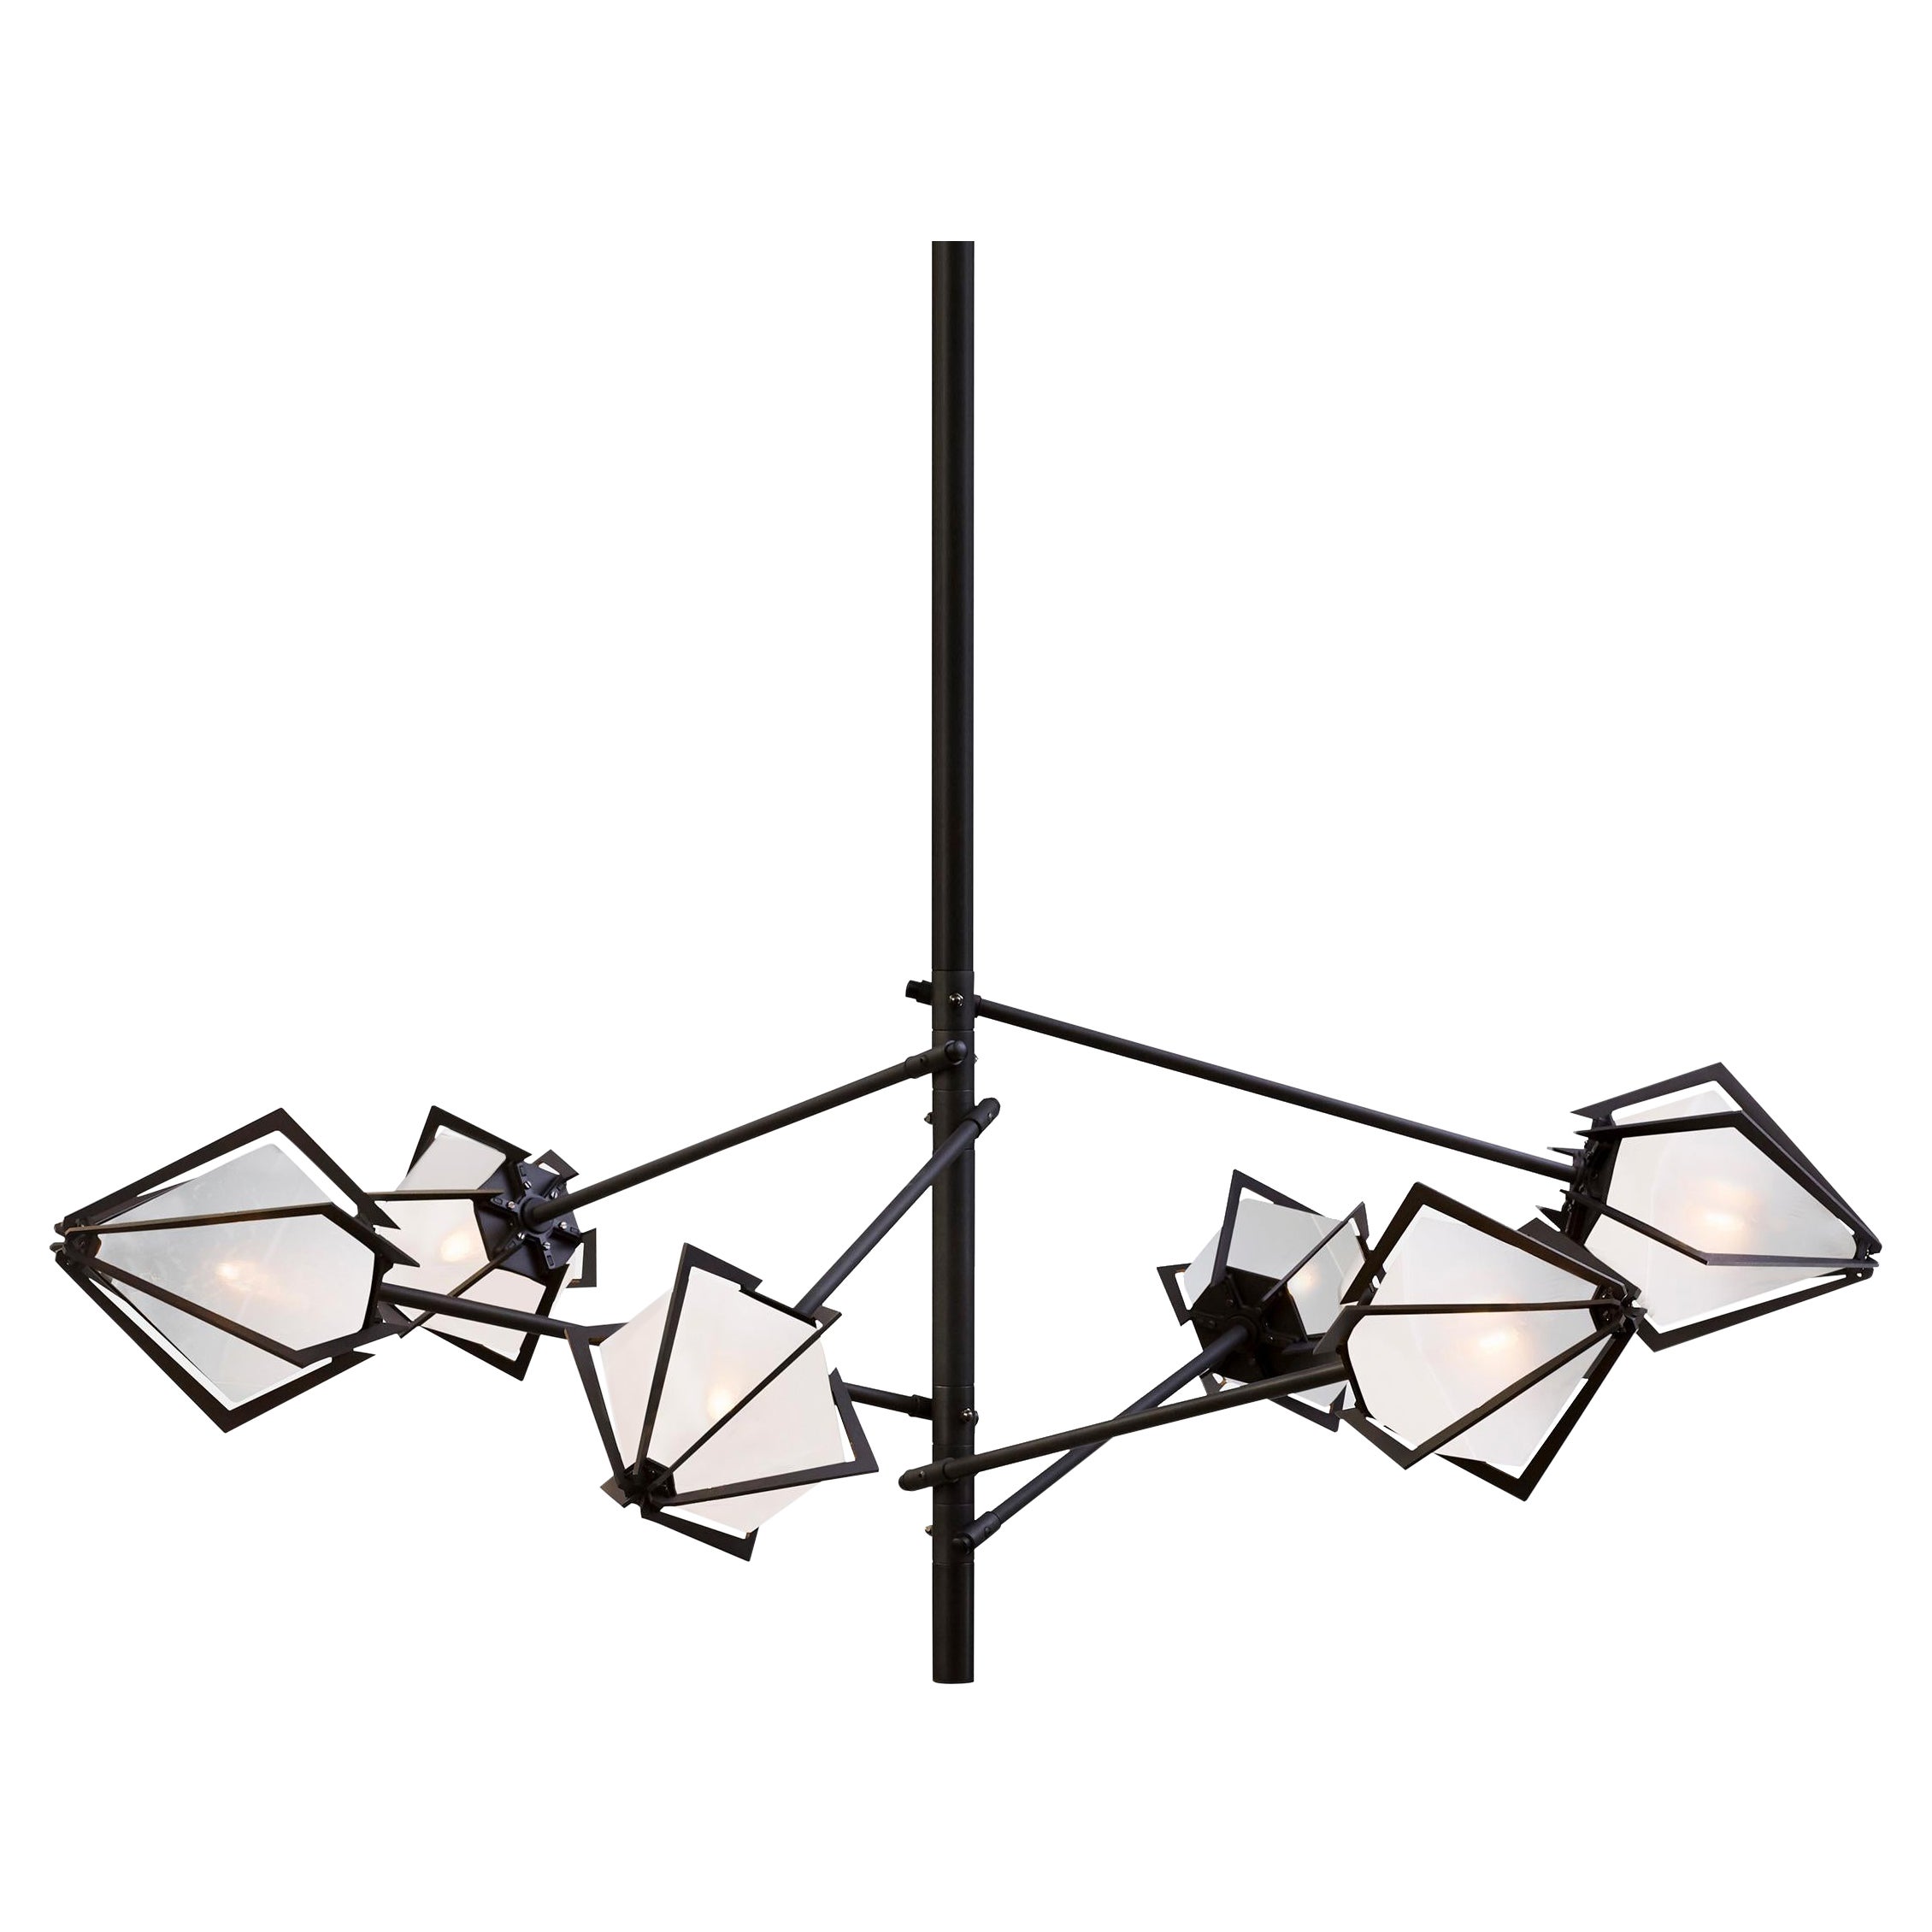 Harlow Spoke Chandelier Small in Blackened Steel and Alabaster White Glass For Sale